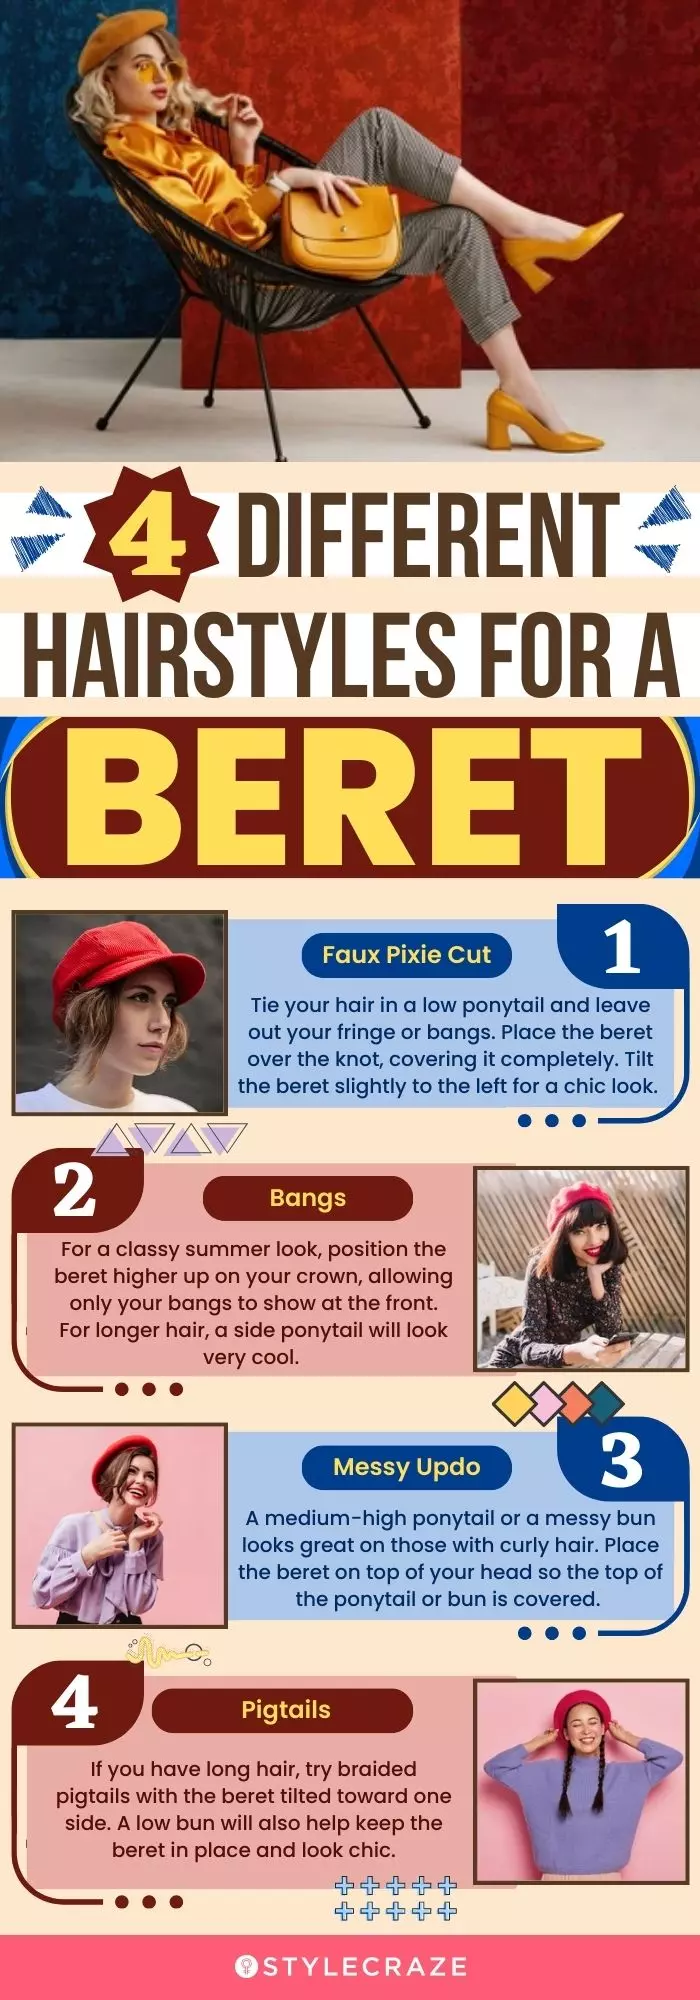 4 different hairstyles for a beret (infographic)